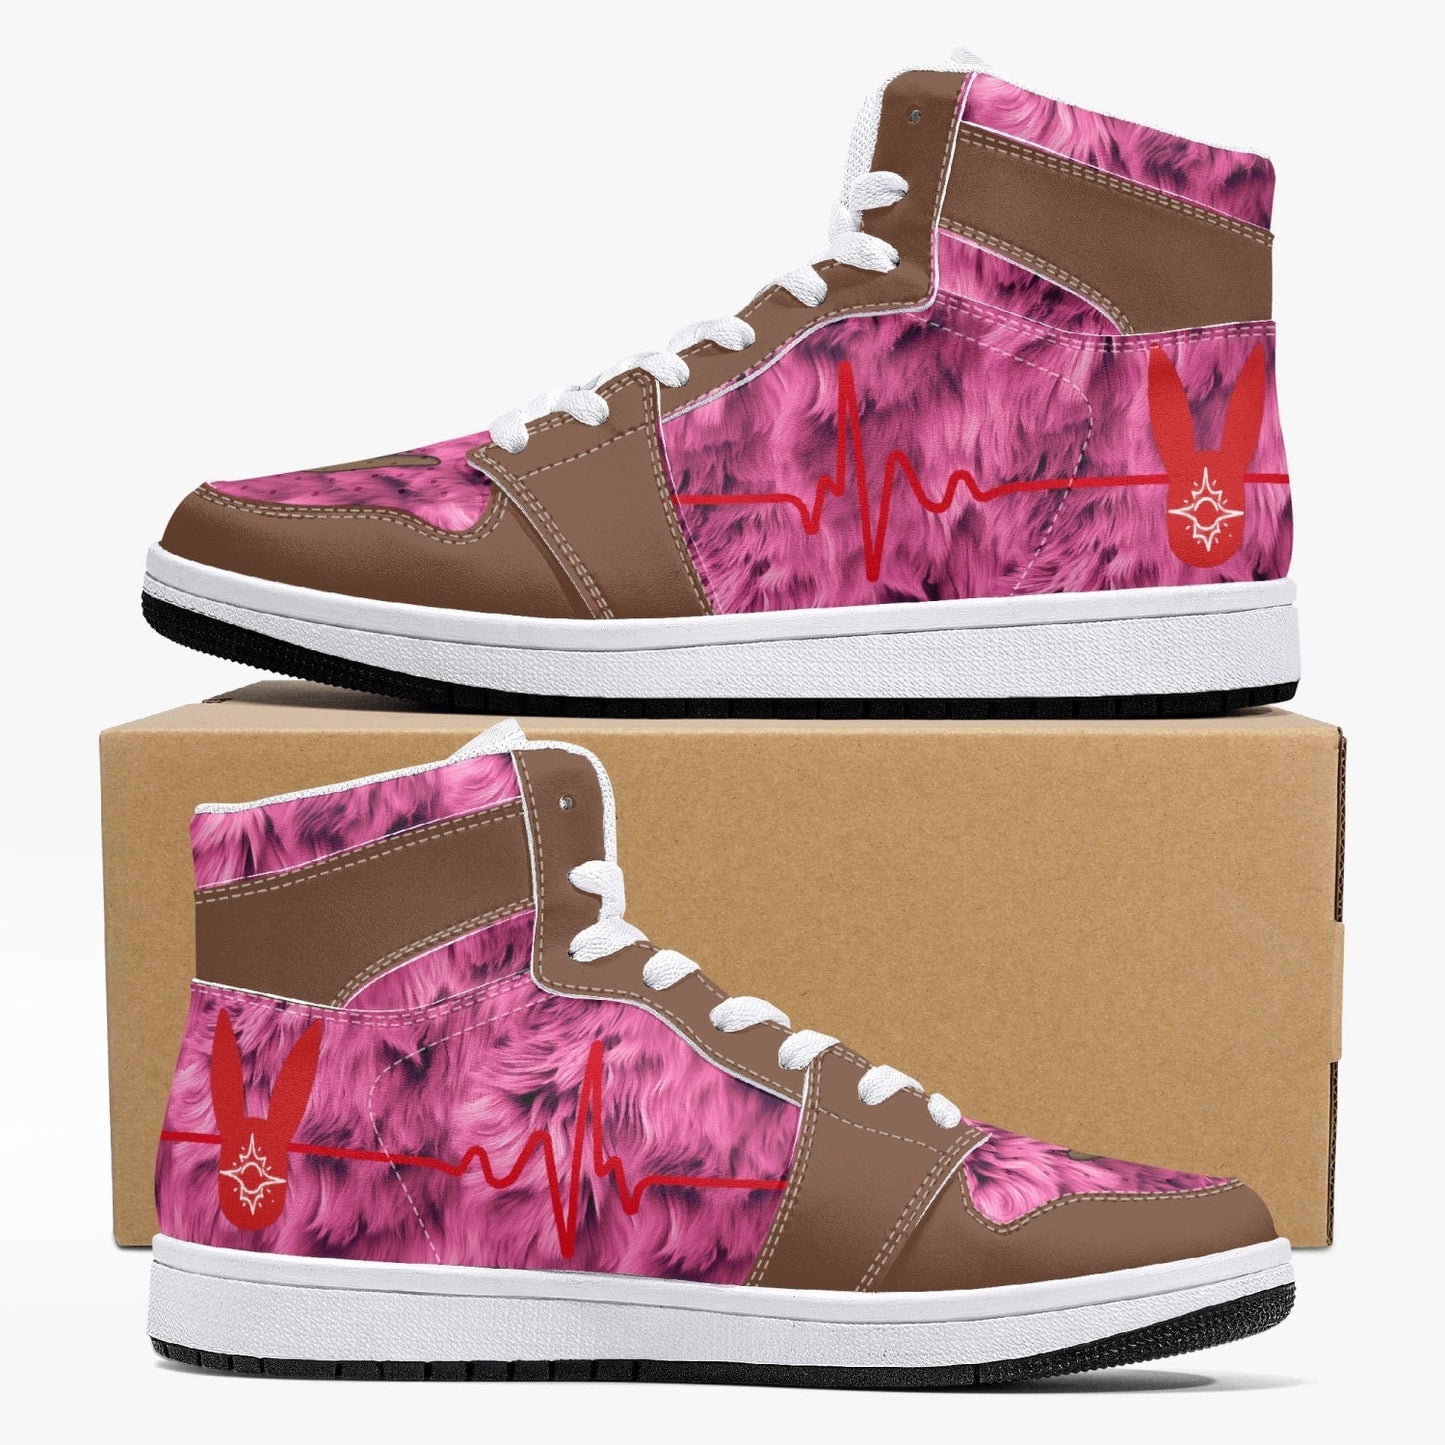 Heartbeat Rhythm in ILY Signs - High-Top Leather Sneakers (Chocolate: Woman)